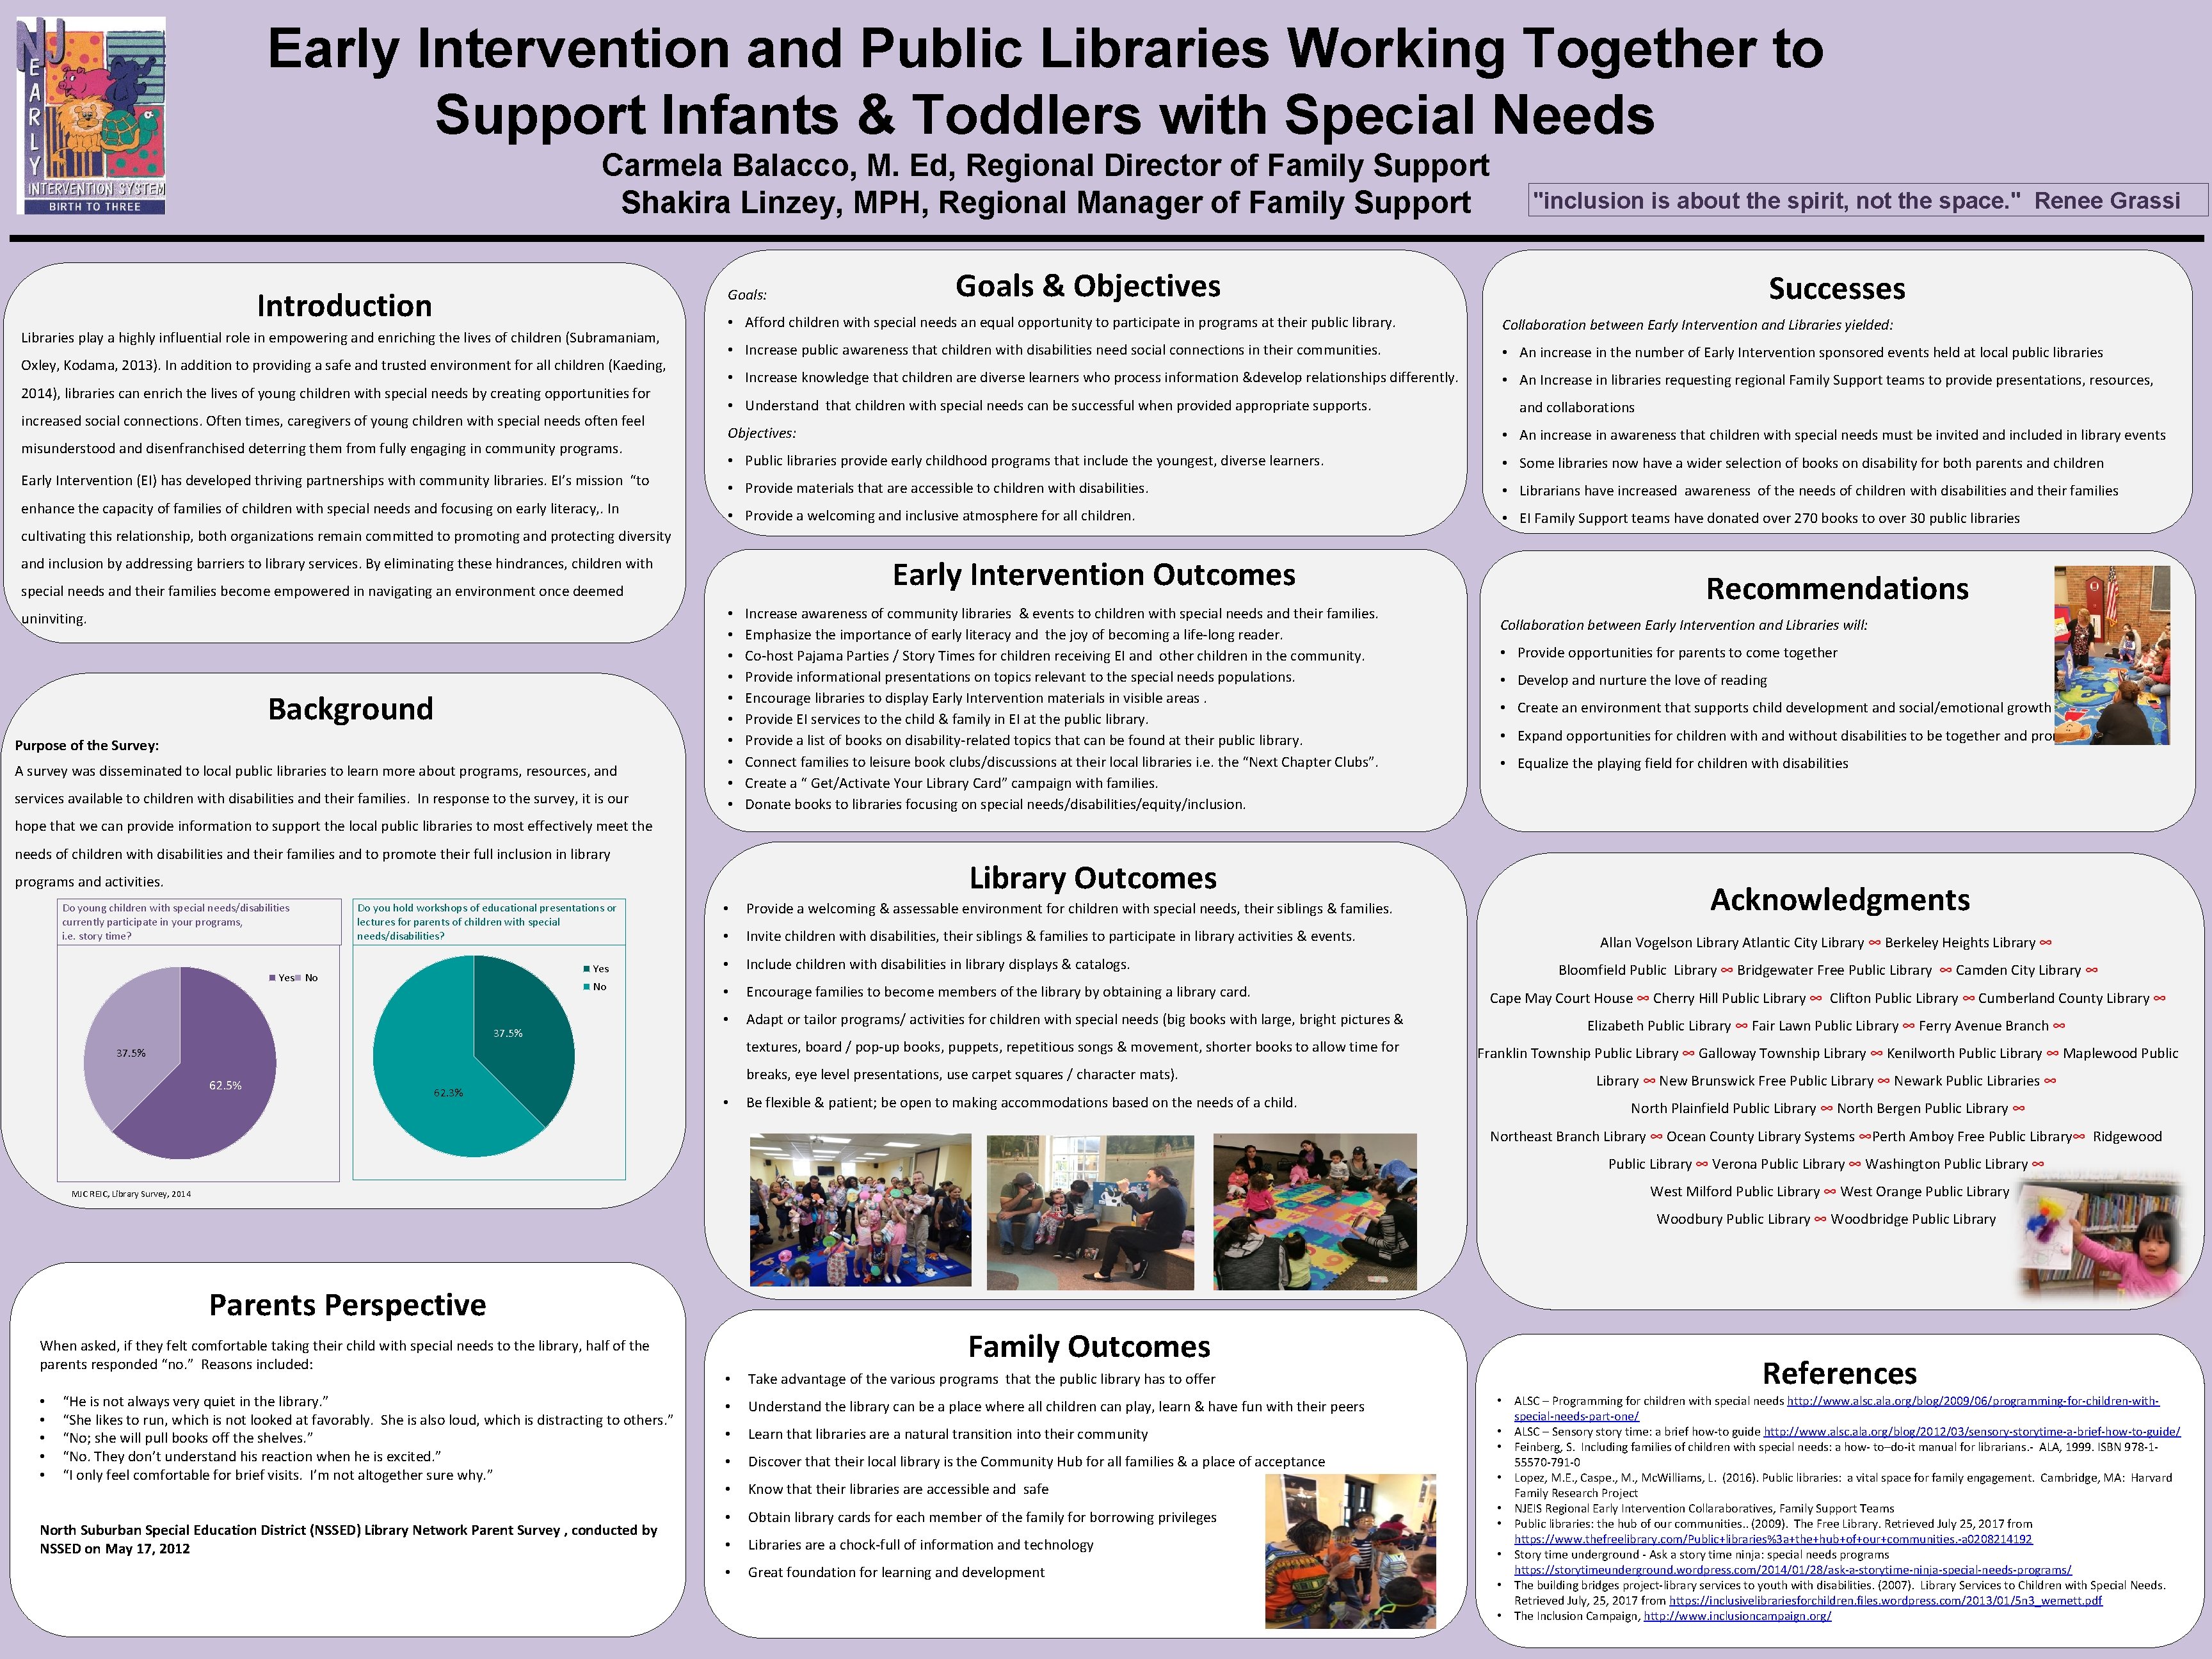 Early Intervention and Public Libraries Working Together to Support Infants & Toddlers with Special